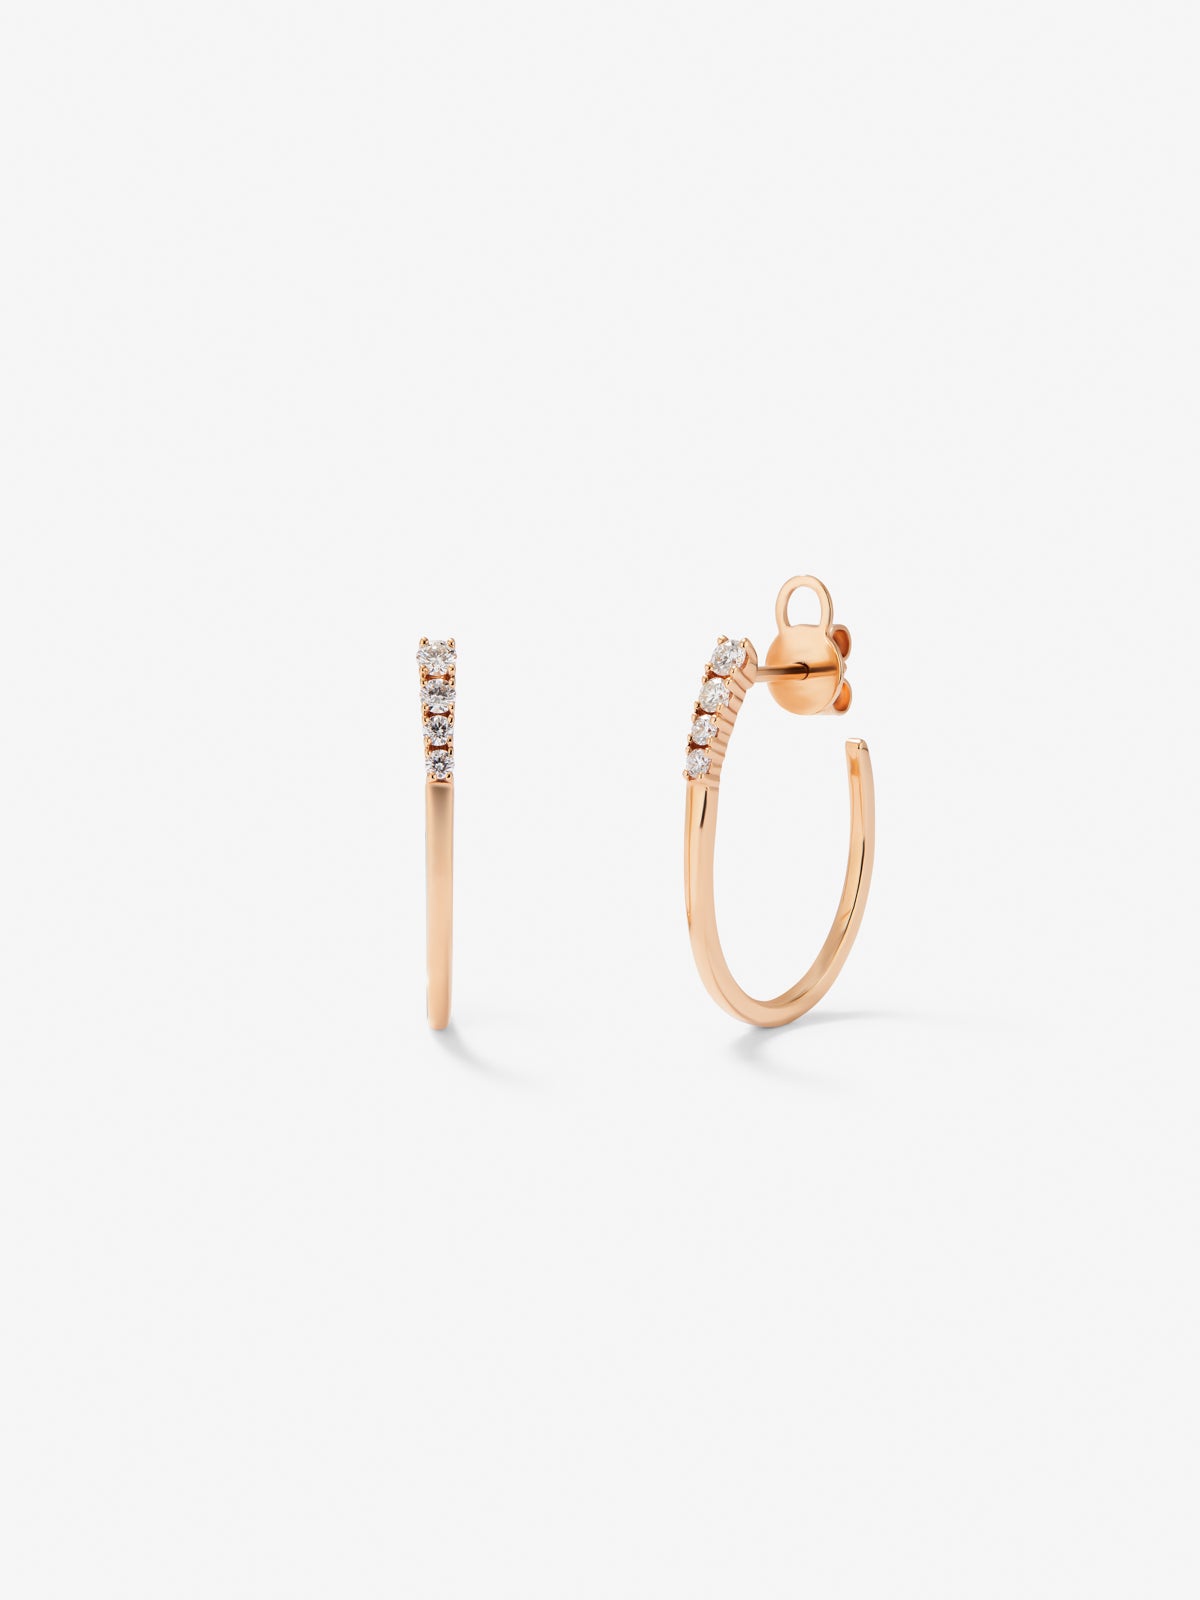 18K rose gold hoop earrings with 8 brilliant-cut diamonds with a total of 0.26 cts